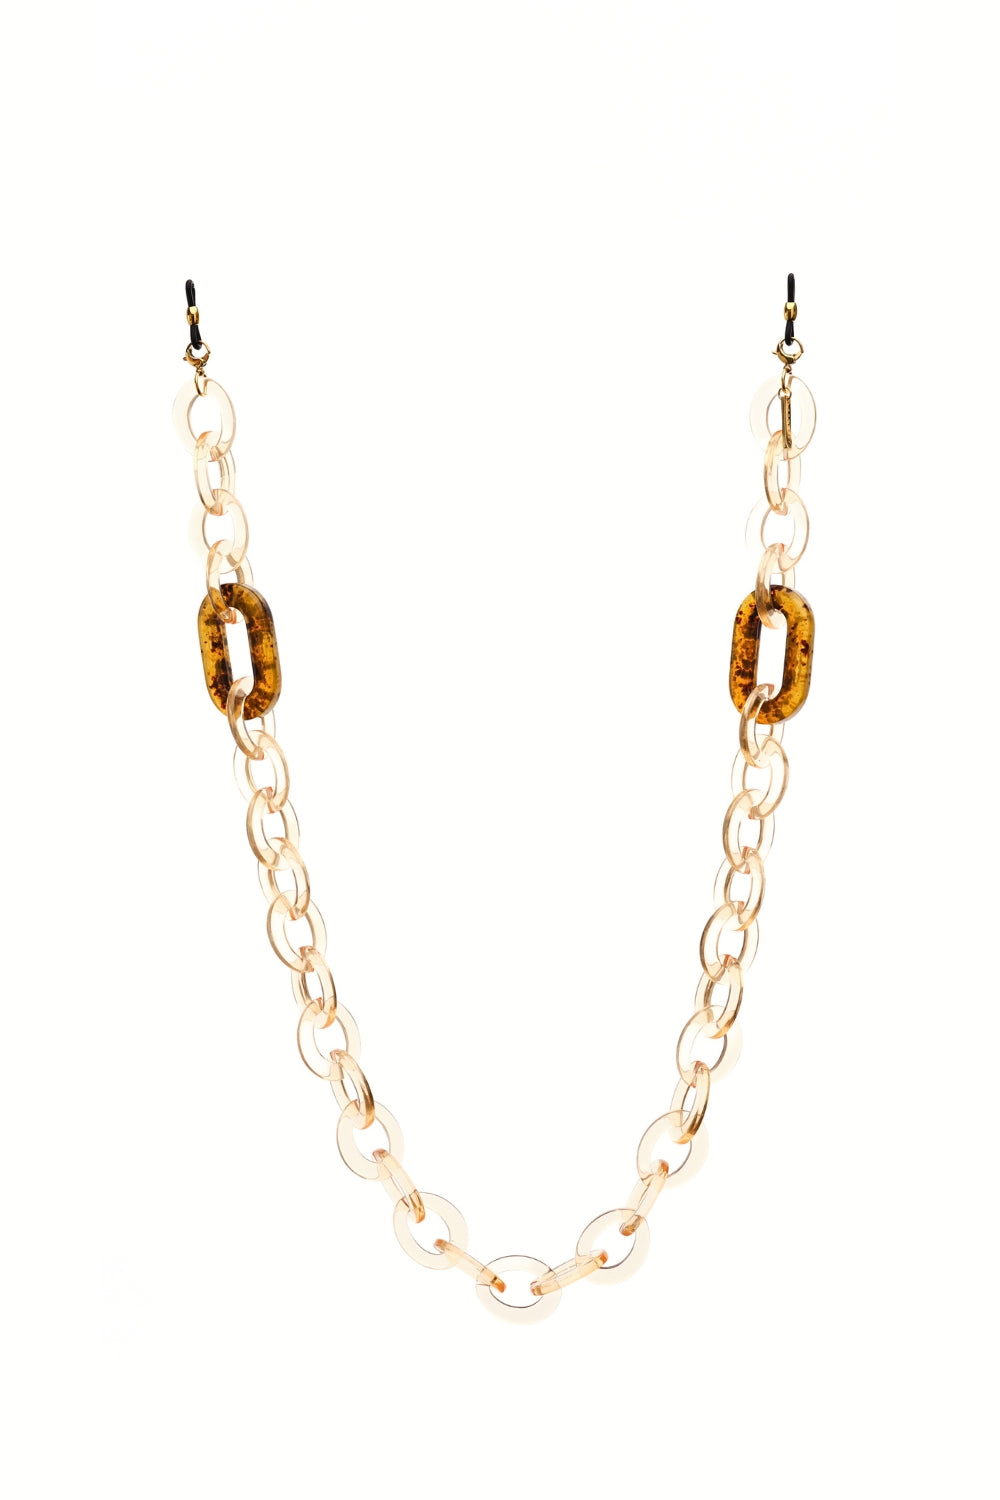 DIRTY ROUNDY - Chunky GOLD Eyewear Chain | SPECSET